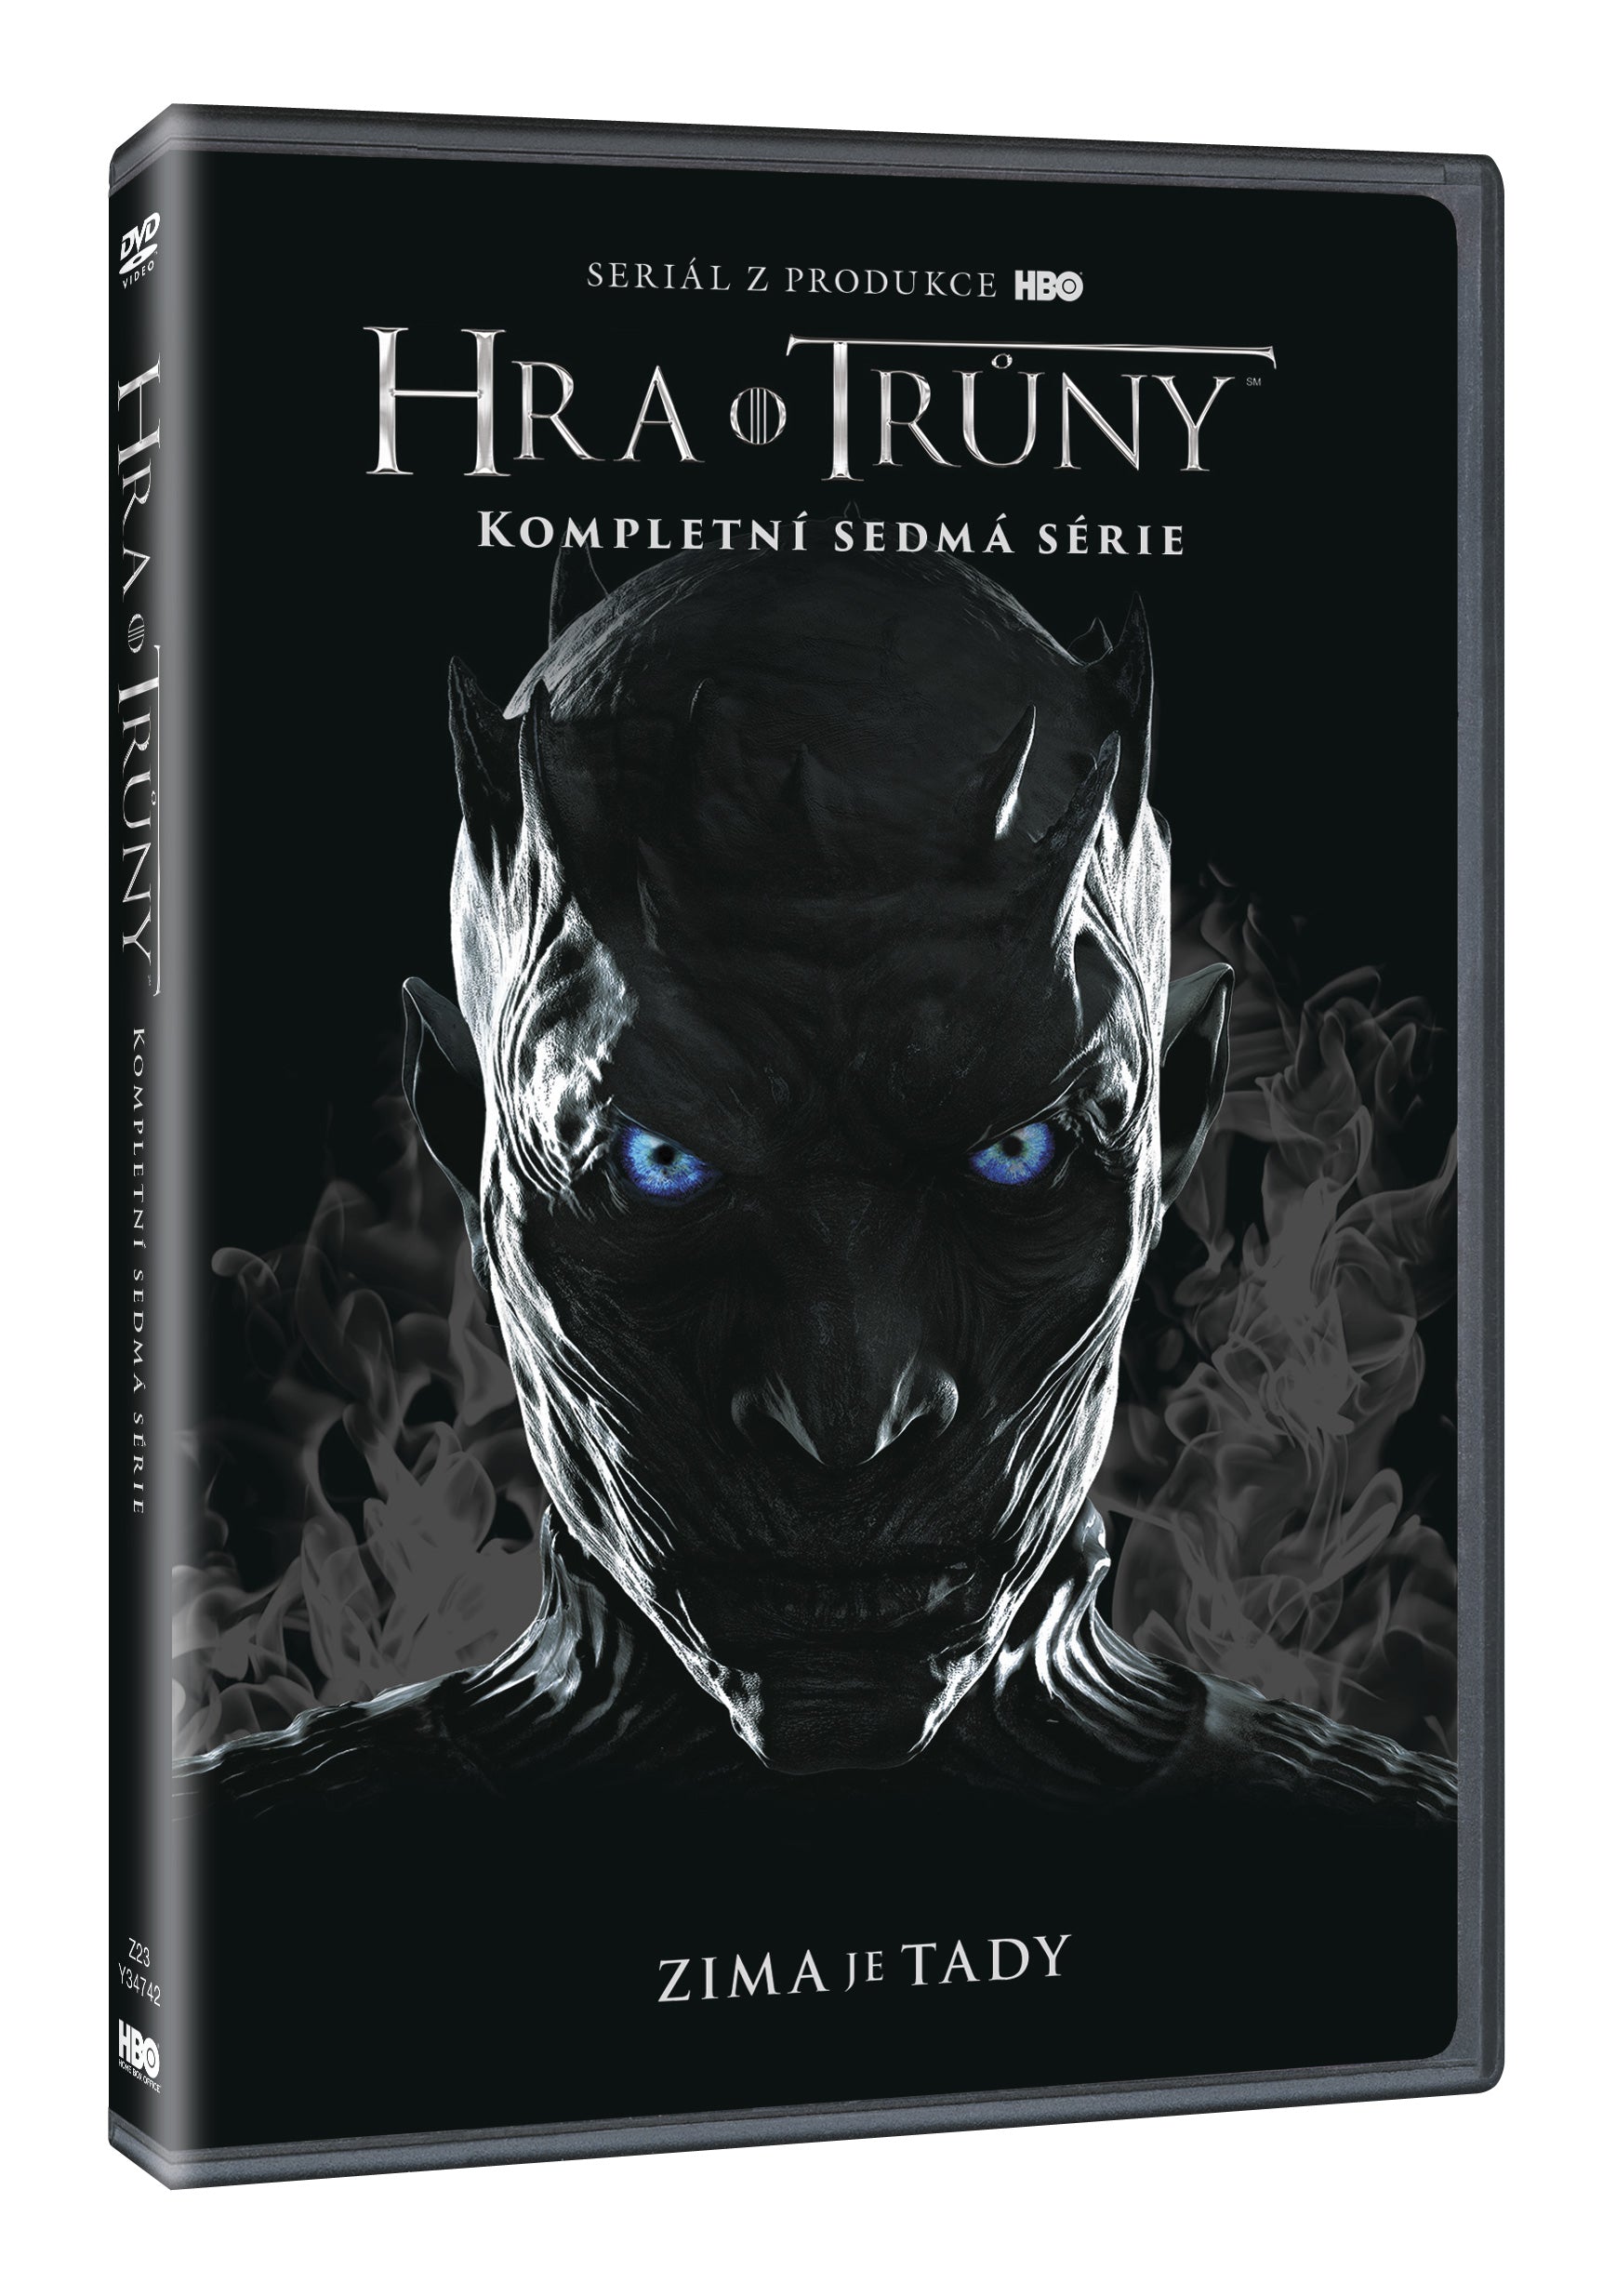 Hra o trony 7. Serie 4DVD - Multipack / Game of Thrones Staffel 7